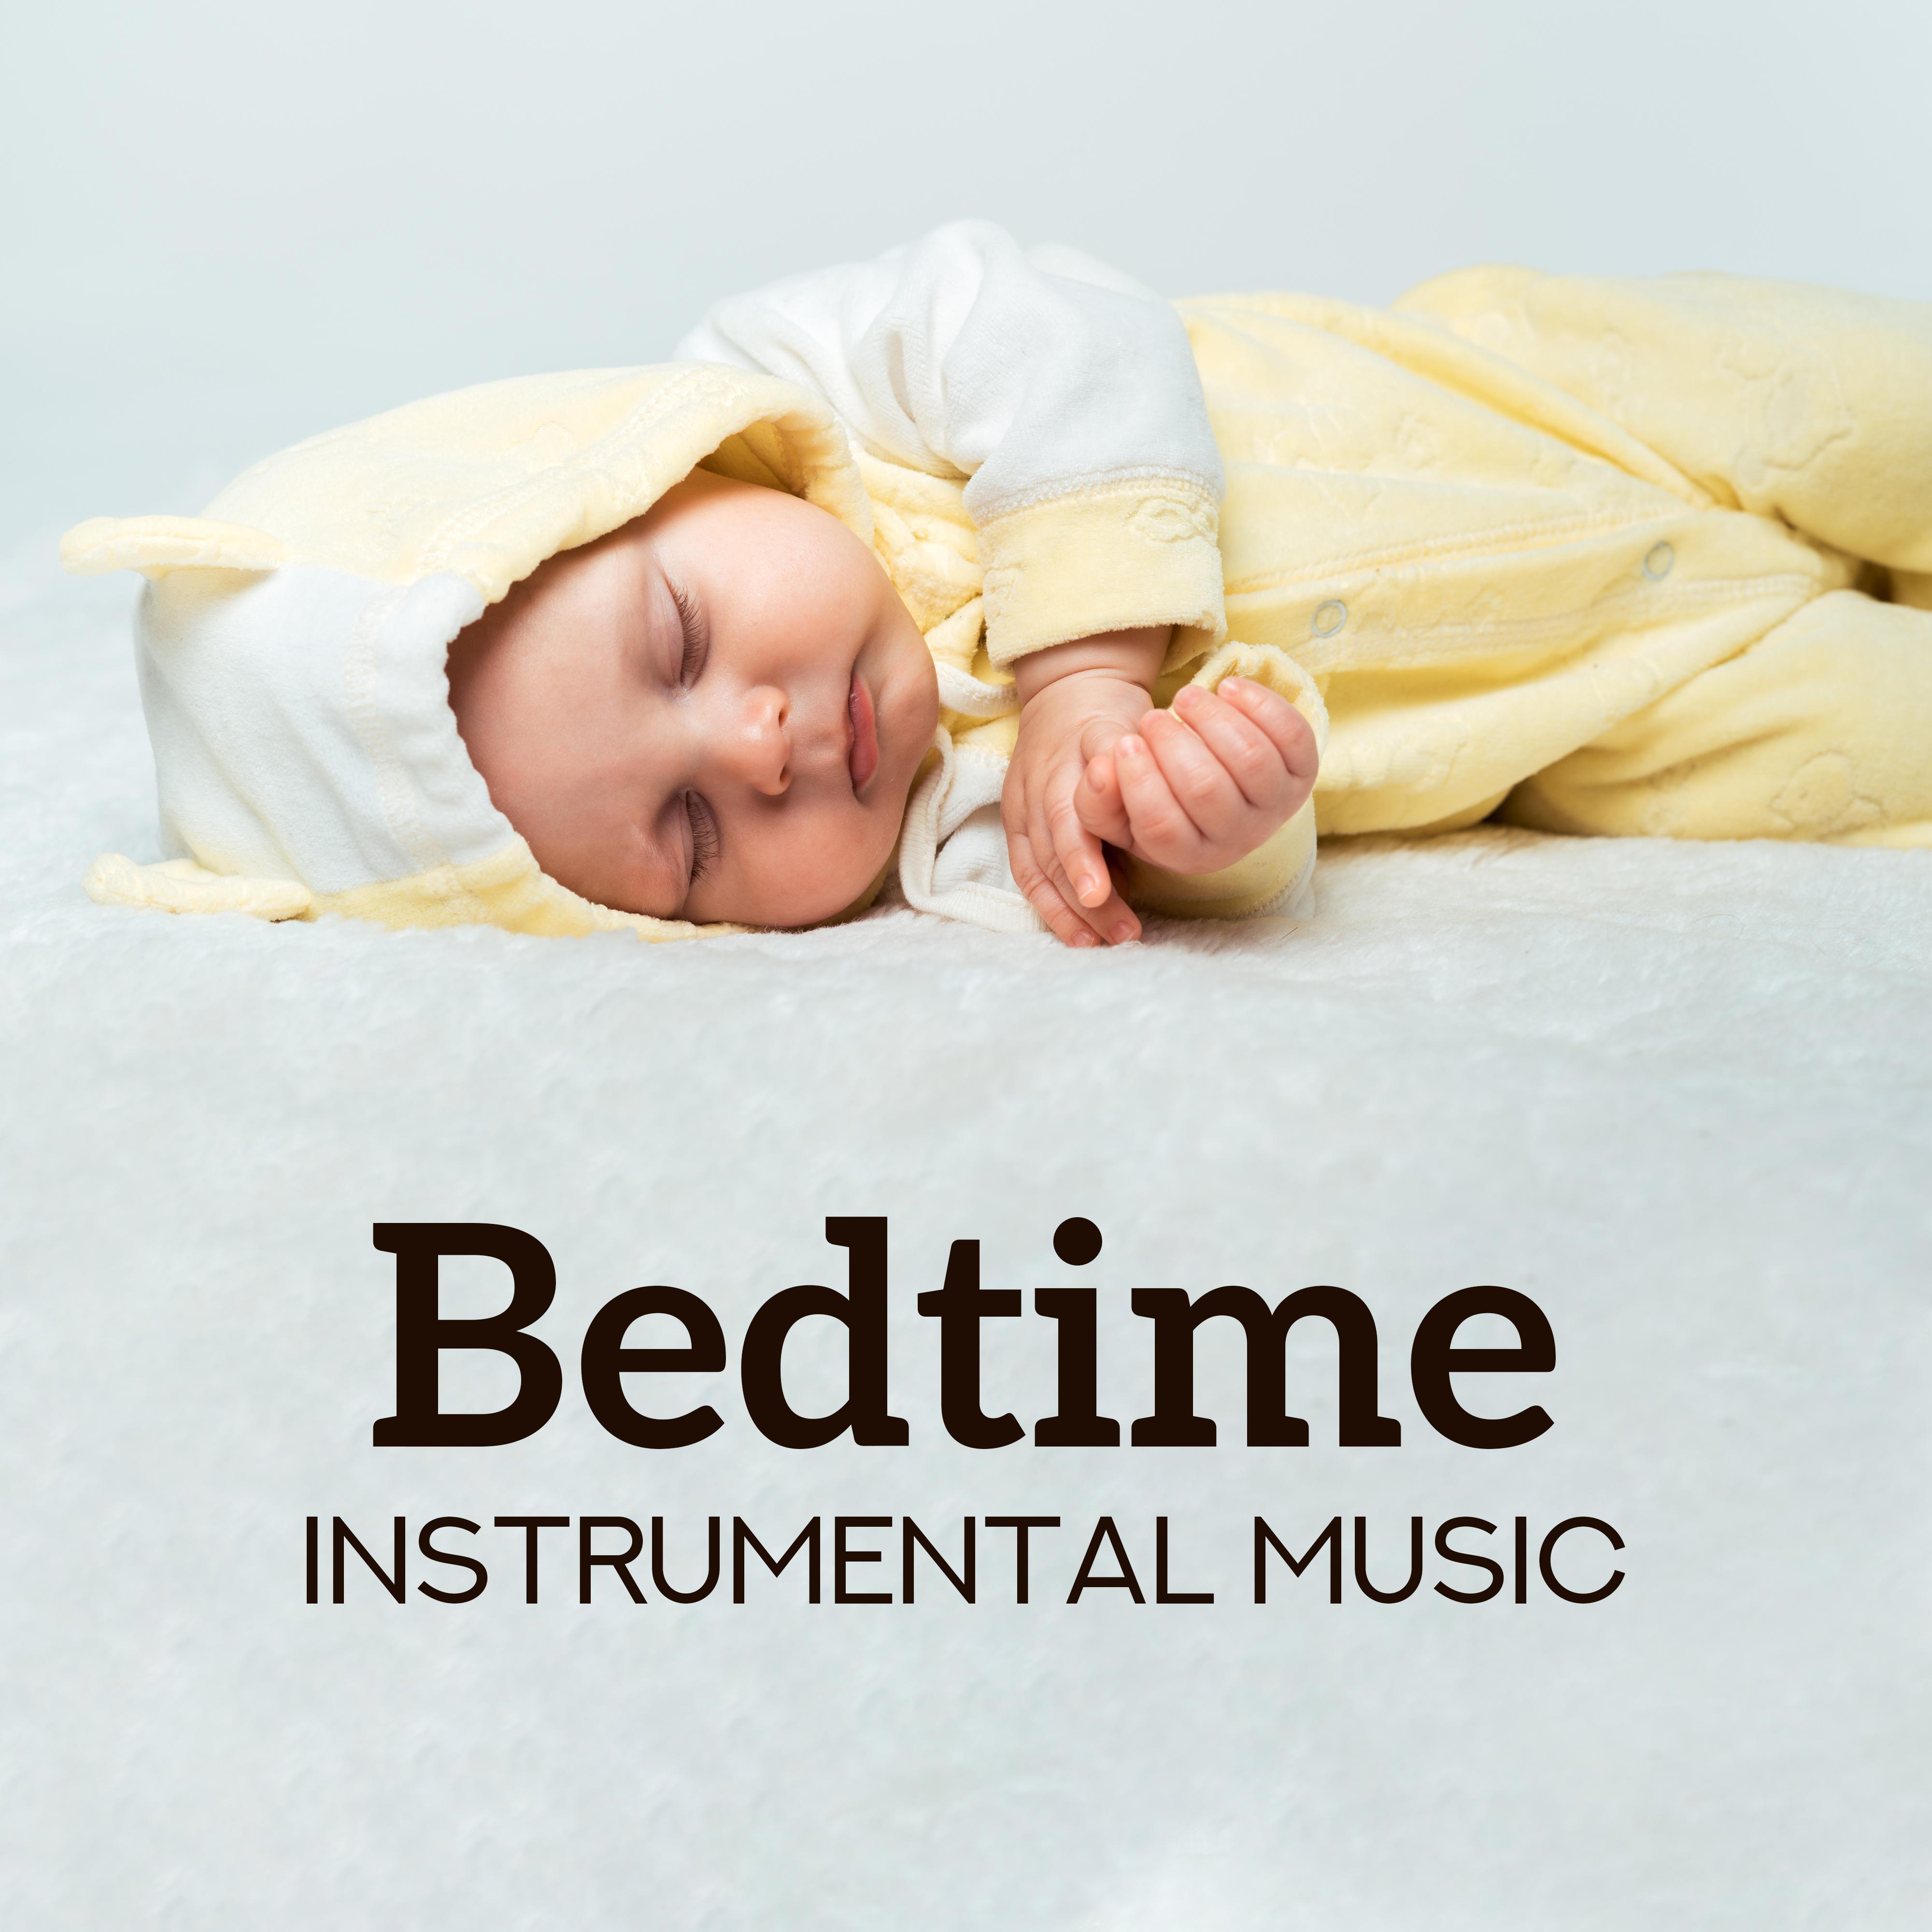 Bedtime Instrumental Music: Piano & Violin Lullabies to Put the Baby to Sleep, for a Short Afternoon Nap or for Playing with the Baby